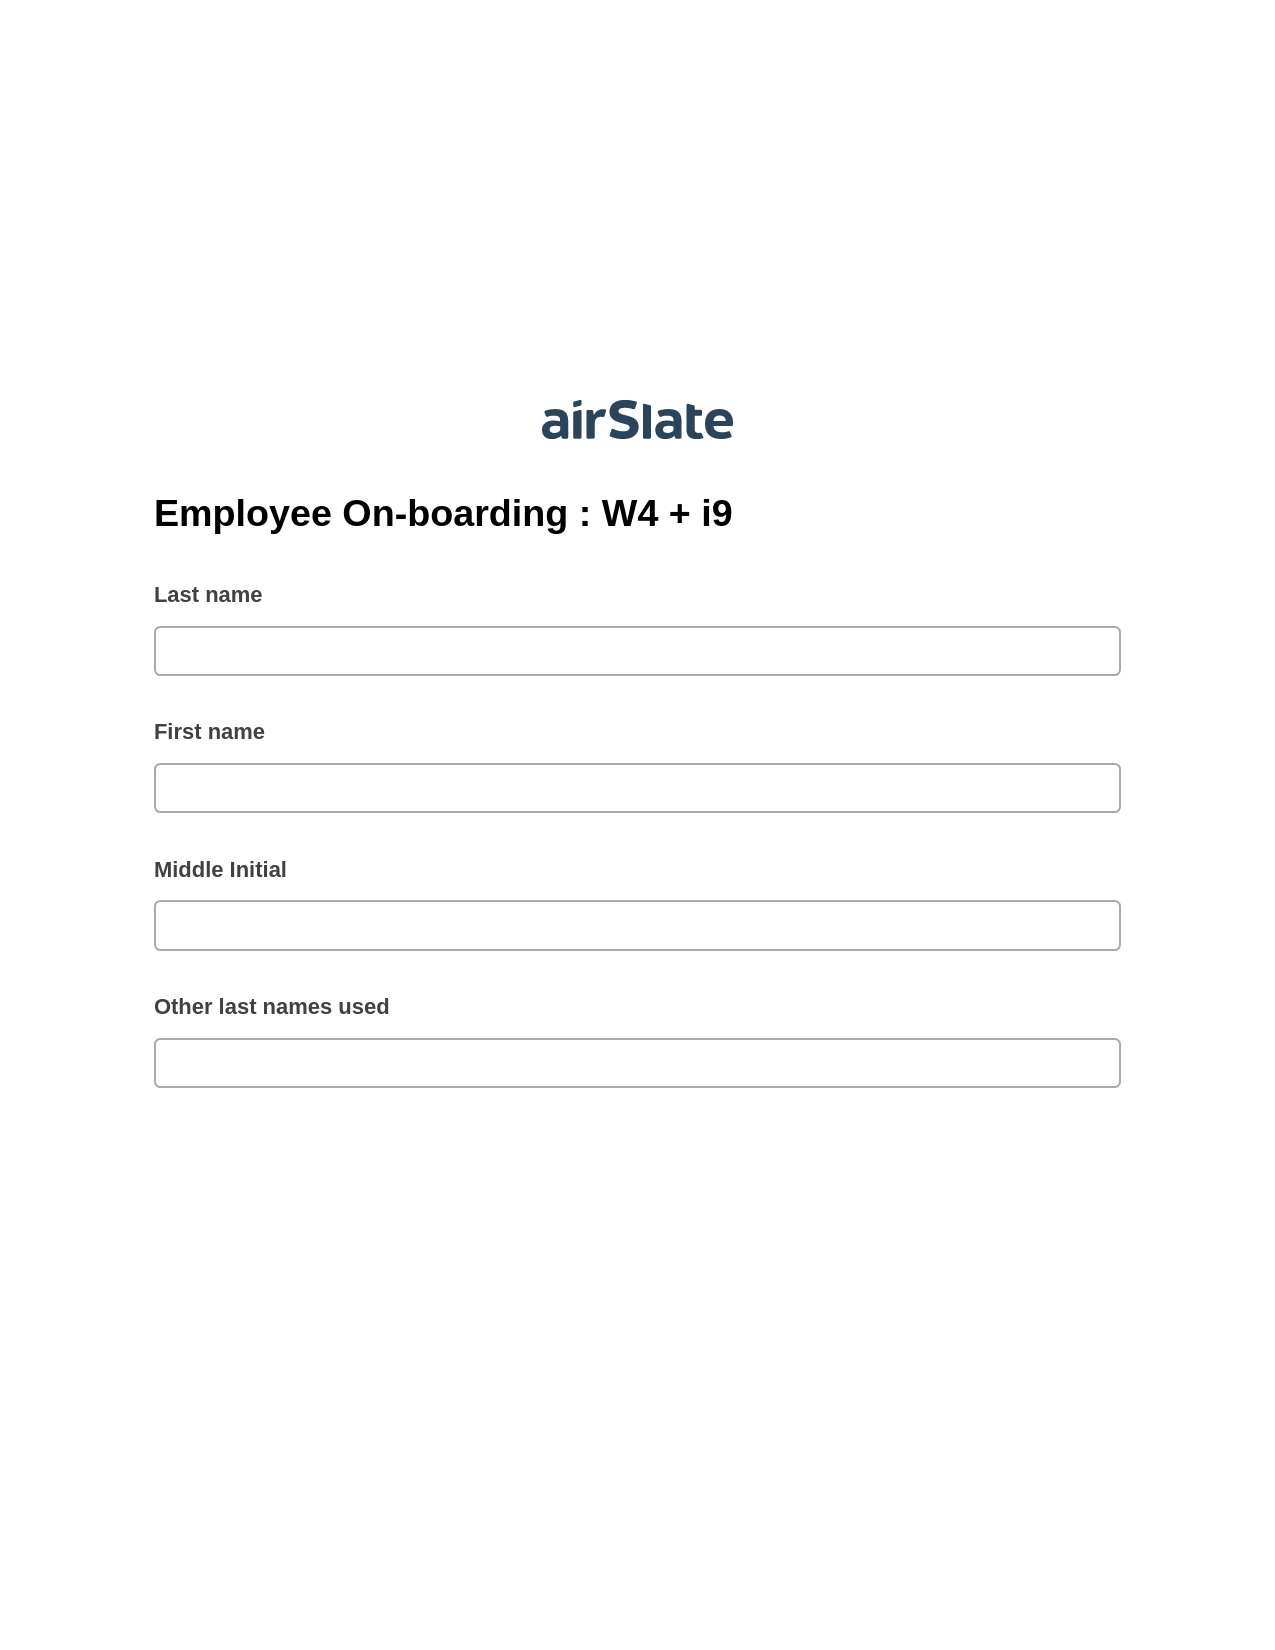 Multirole Employee On-boarding : W4 + i9 Pre-fill from Salesforce Records via SOQL Bot, Mailchimp Add Recipient to Audience Bot, Export to Google Sheet Bot